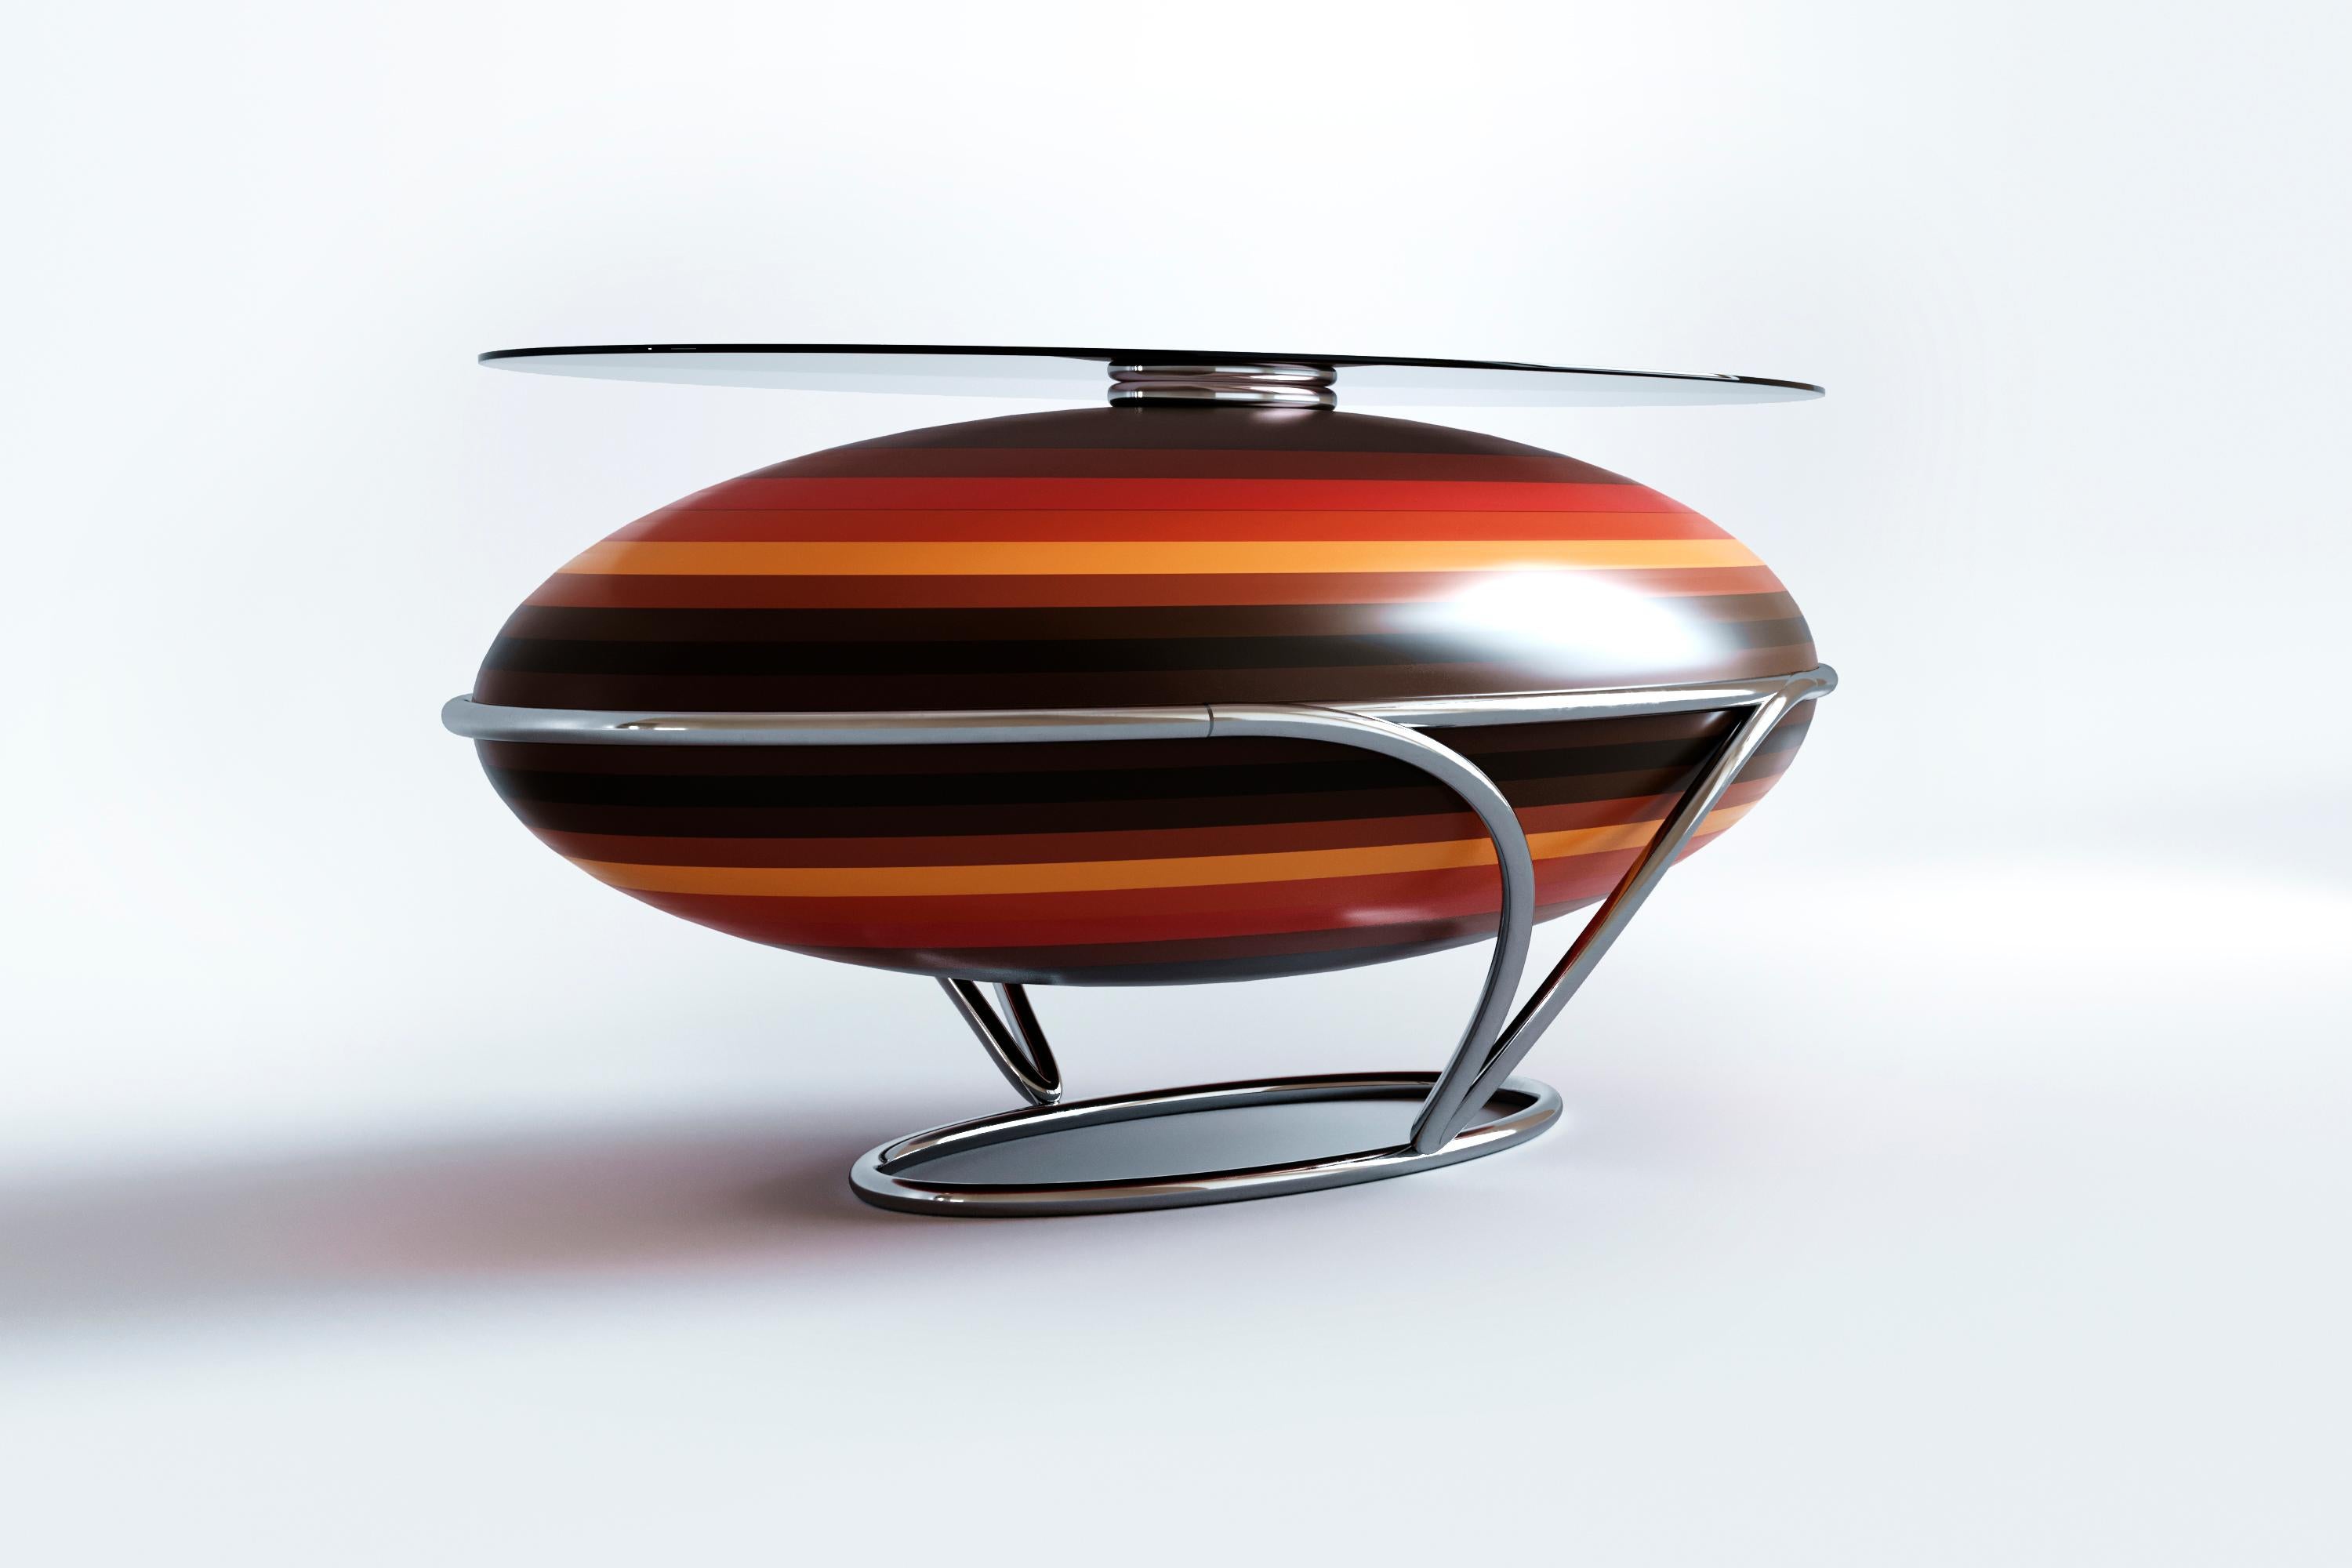 The table from the Eggs collection is another successful contemporary variation of the up-to-date aesthetics of retro-futurism. Spherical shape, bright-colored stripes that contrast with the natural texture of dark wood, varnish, metal stand, and a